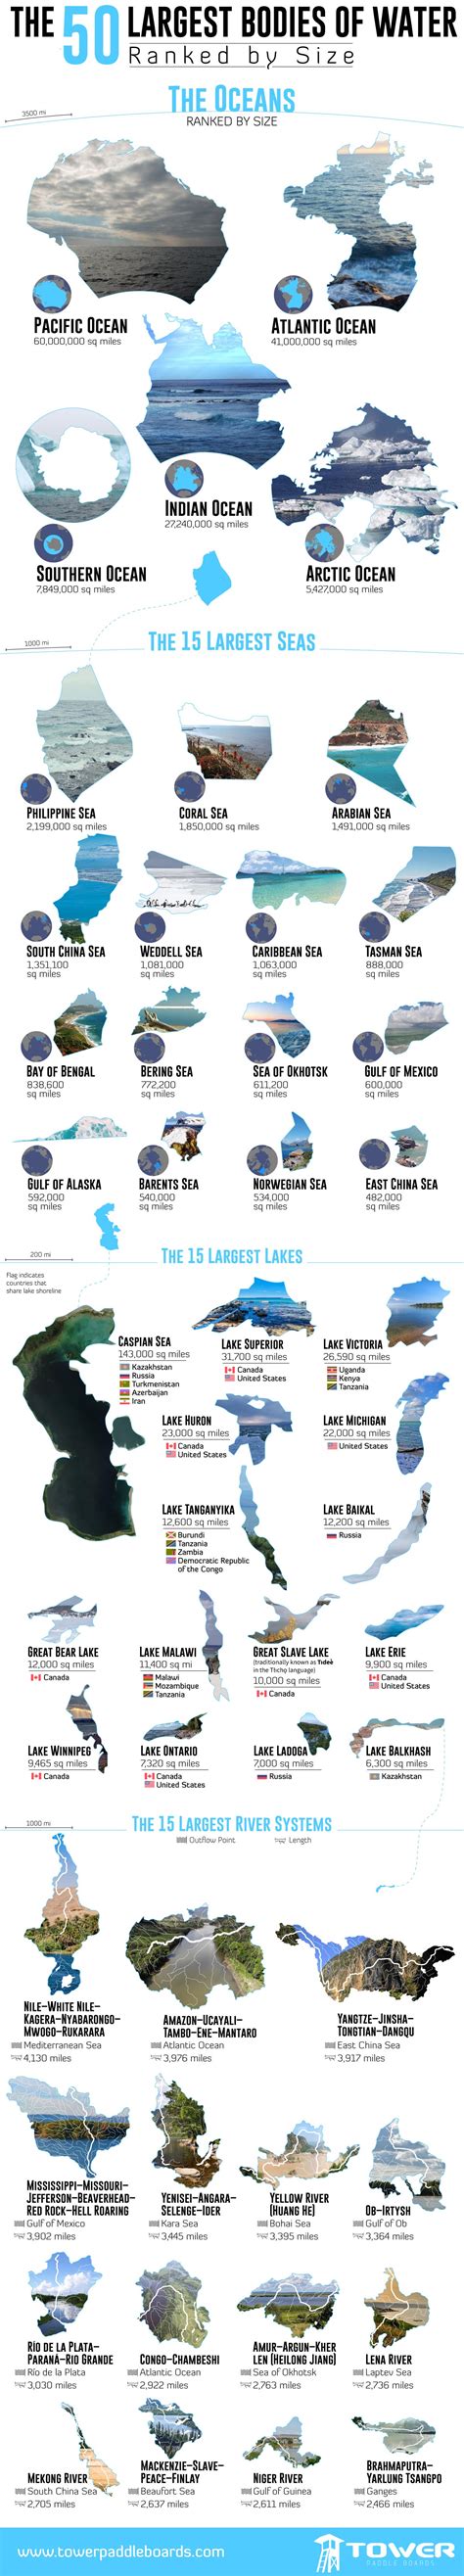 The 50 Largest Bodies Of Water Ranked By Size Infographic